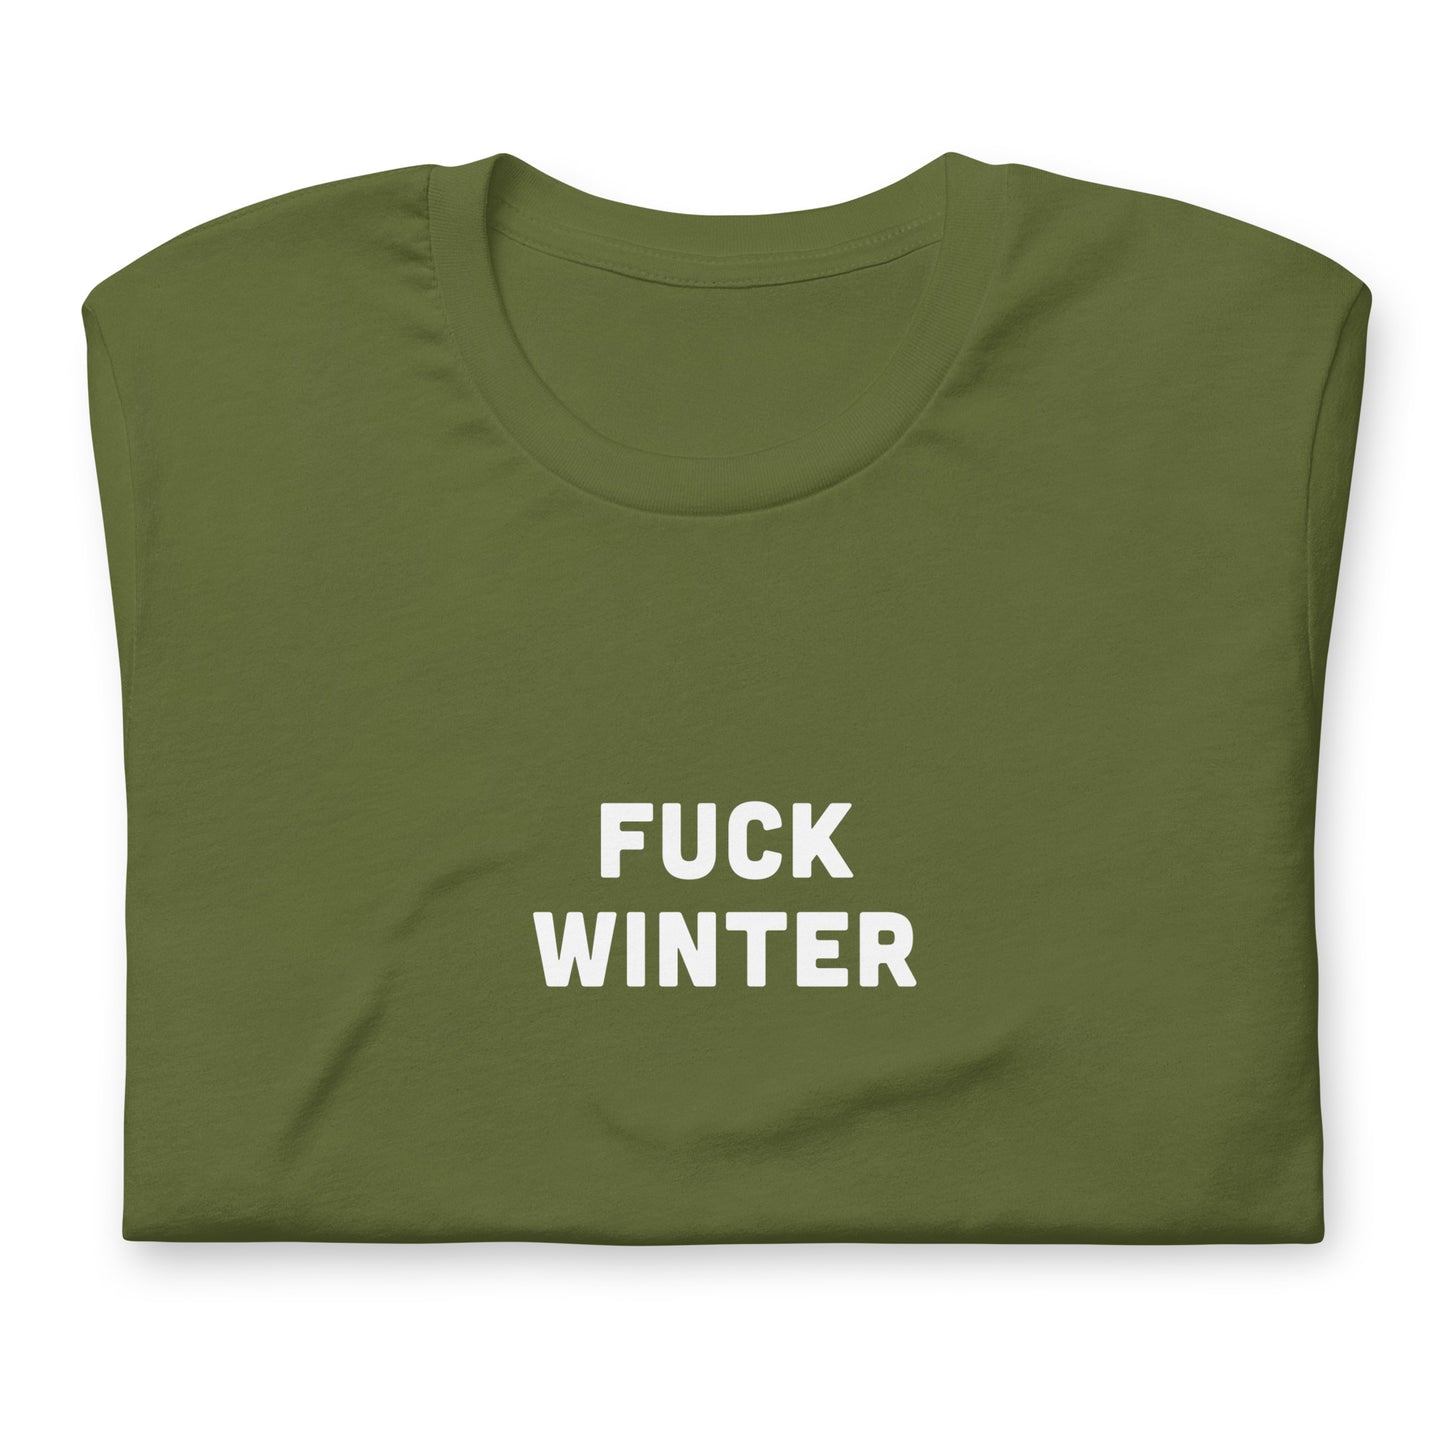 Fuck Winter T-Shirt Size S Color Navy